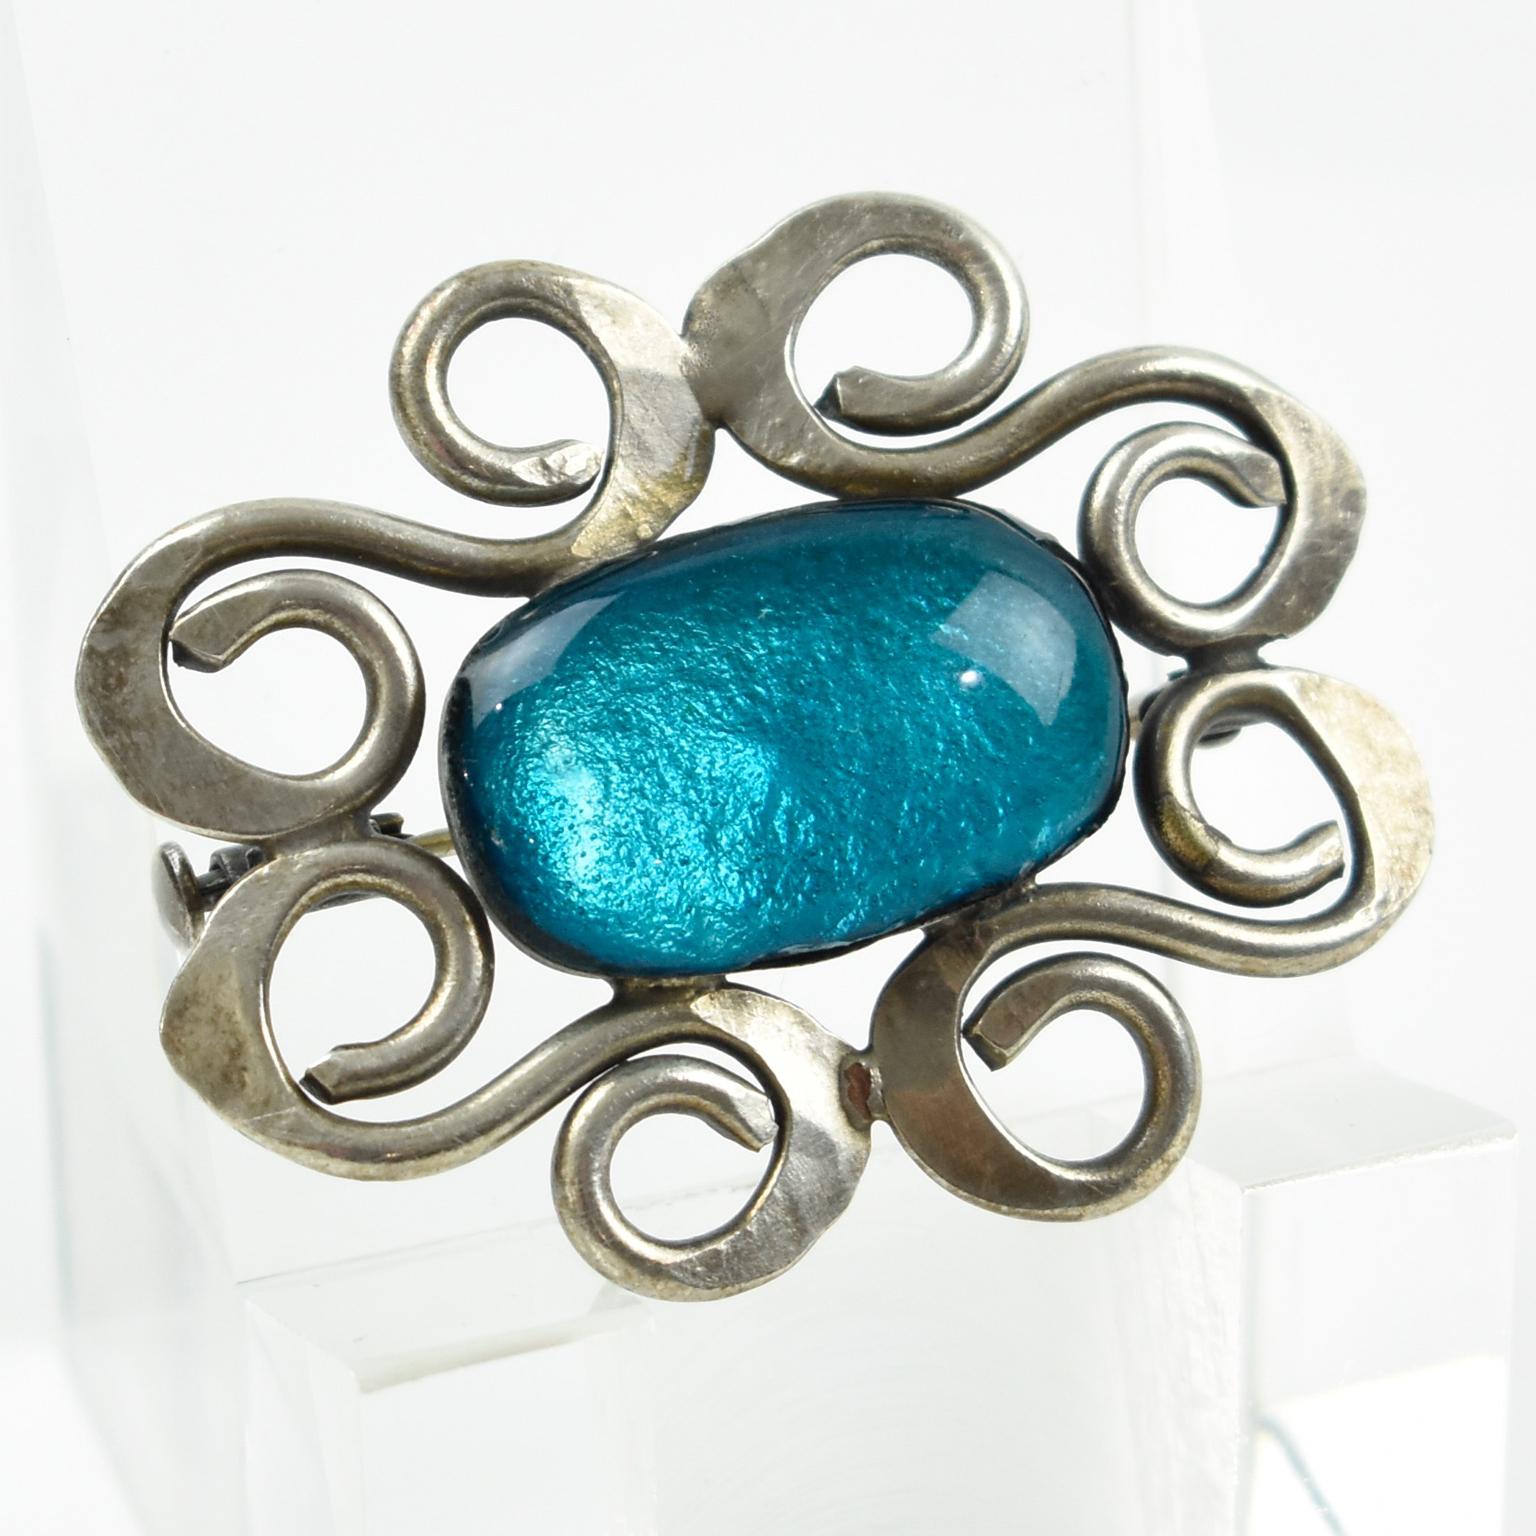 French Mid-Century Modern 1960s pin brooch. Geometric design with floral-inspired shape, reminiscent of Jacques Gautier's work. Silvered metal frame topped with electric blue enamel glass with a silver foil background. Security closing clasp. No